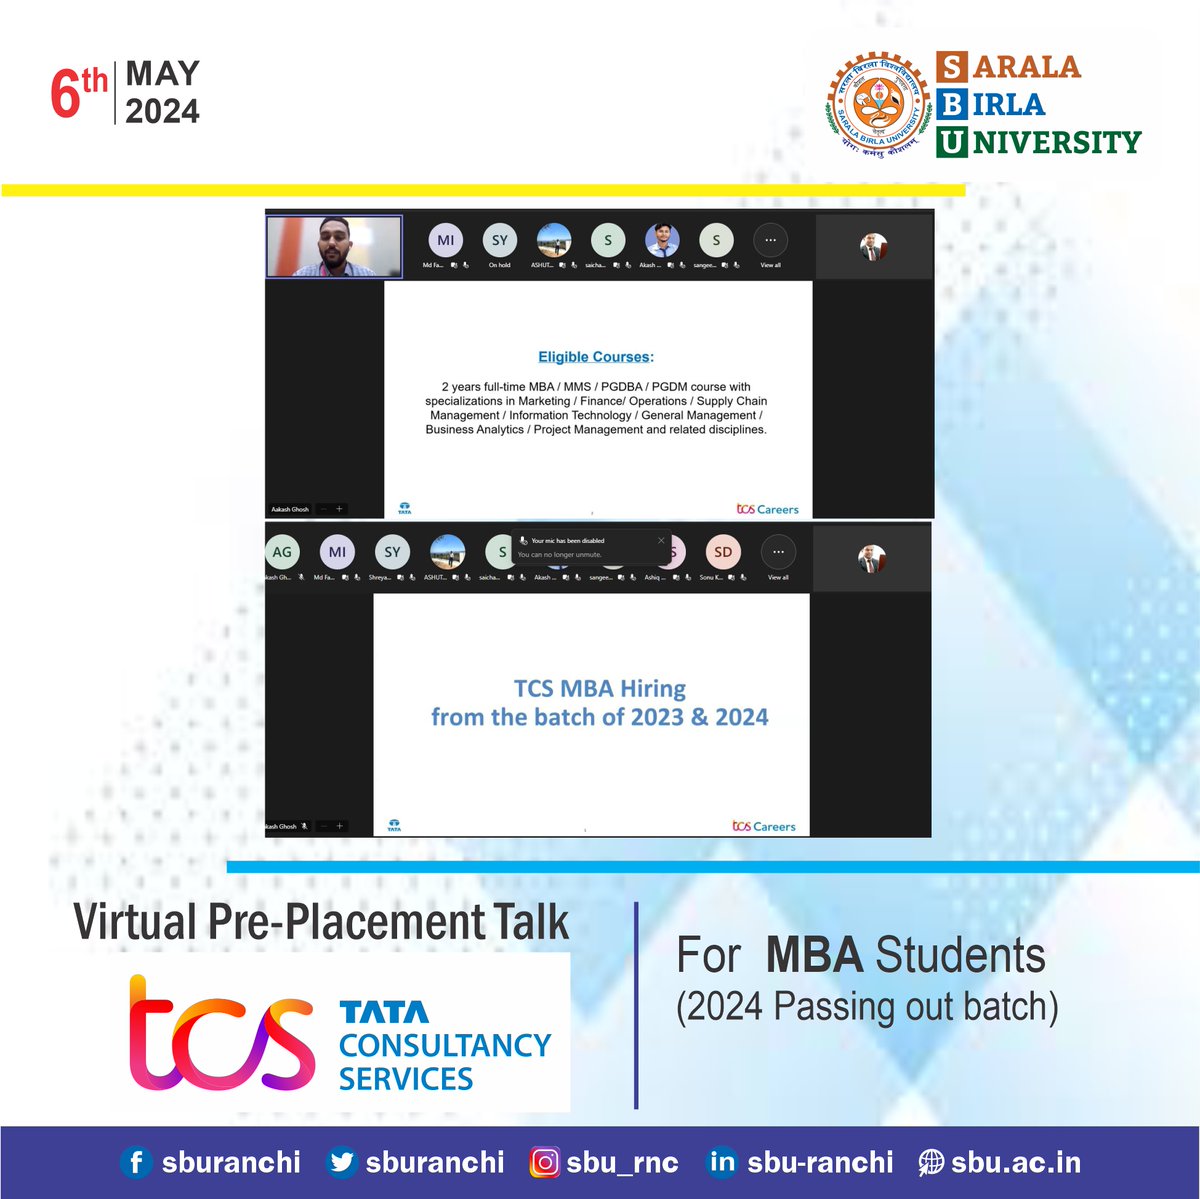 Training & Placement Department, Sarala Birla University Ranchi Organized Virtual Pre-Placement talk on 06th May 2024 with TCS for MBA 2024 passing out batch.
#sbu #sburanchi #placementdrive #TCS